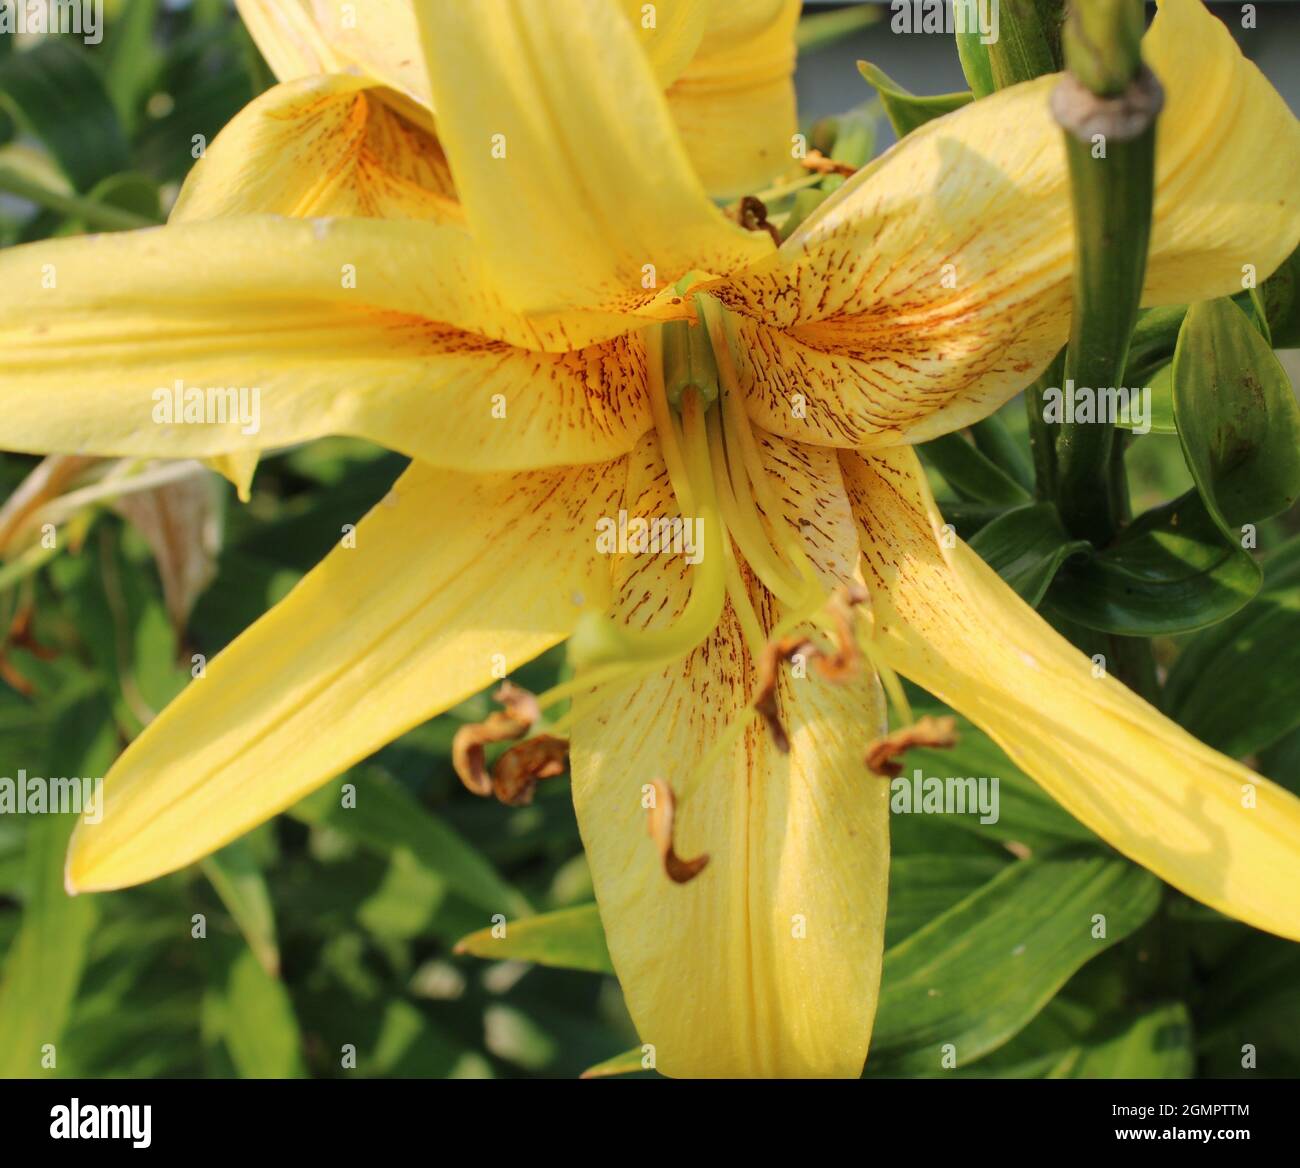 Yellow day lily flower. Stock Photo